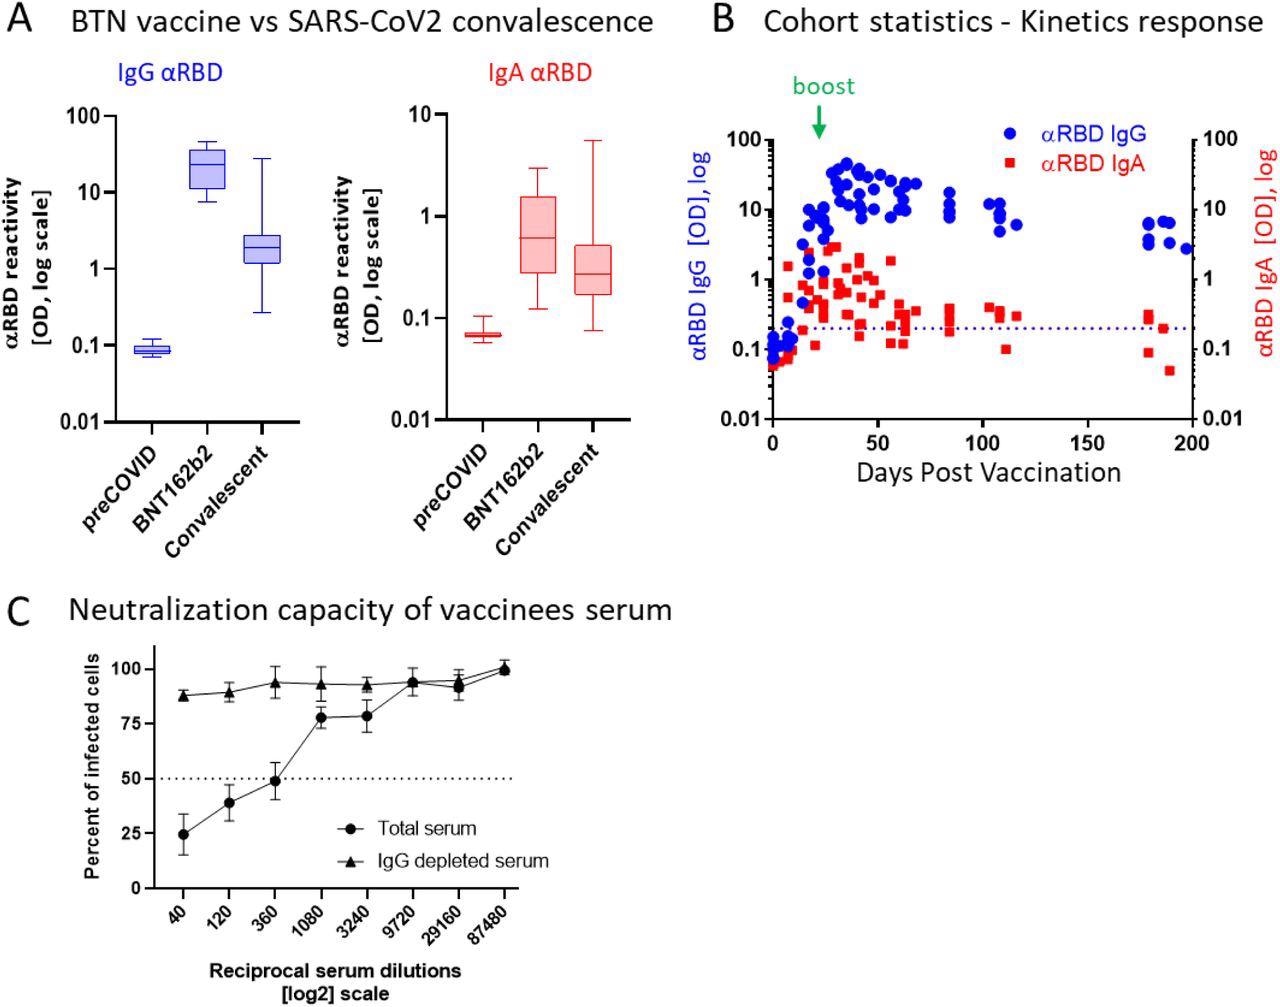 BNT162b2 vaccinees mount serum antiRBD-SARS-CoV-2, IgG and IgA with IgG showing strong neutralization potential. (A) Independent ELISA measurements of anti-RBD IgG and of anti-RBD IgA in serum samples collected from pre-COVID (N=51), BNT162b2 vaccinees (N=17) and post-COVID-19 (N=22) convalescents, as indicated. Convalescent samples were collected within two months post-recovery. BNT162b2 vaccinees samples represent the peaks of individual responses. (B) Quantitative kinetic profile of anti-RBD IgG (blue) and IgA (red) in serum sampled (N=76) in the vaccinees cohort (N=18), plotted as a function of days, post first vaccine dose. See Table S1 for cohort and sampling details. Independent ordinate axes for IgG (left, blue) and IgA (right, red) highlight the restricted, relative nature of the comparison between isotypes in this experiment, as discussed in the text, see also Figure 2 for subsequent developments. Green arrows indicate the timing of the second vaccine dose (the boost). (C) Serum neutralization assessed by SARS-CoV-2-Spike pseudotyped VSV-GFP-ΔG reporter assay on Vero-E6 cells. Neutralization is expressed as a percentage of pseudovirus-infected green cells without serum (total infection = 100%). Percentage of neutralization by sera of pool of four individual vaccinees (see the corresponding anti-RBD IgG and IgA values and times post-vaccination in Figure S1) are plotted as a function of the reciprocal values of sera dilutions displayed on a log2 scale, as indicated (filled circles, total serum, NT50 is reached on average at the dilution of ∼1:360, extrapolated by cross-section with the dashed line. The contribution of IgG to serum neutralization is evaluated by the depletion of the IgG isotype using anti-IgG specific magnetic beads (triangles). Results of three experimental repeats are represented.